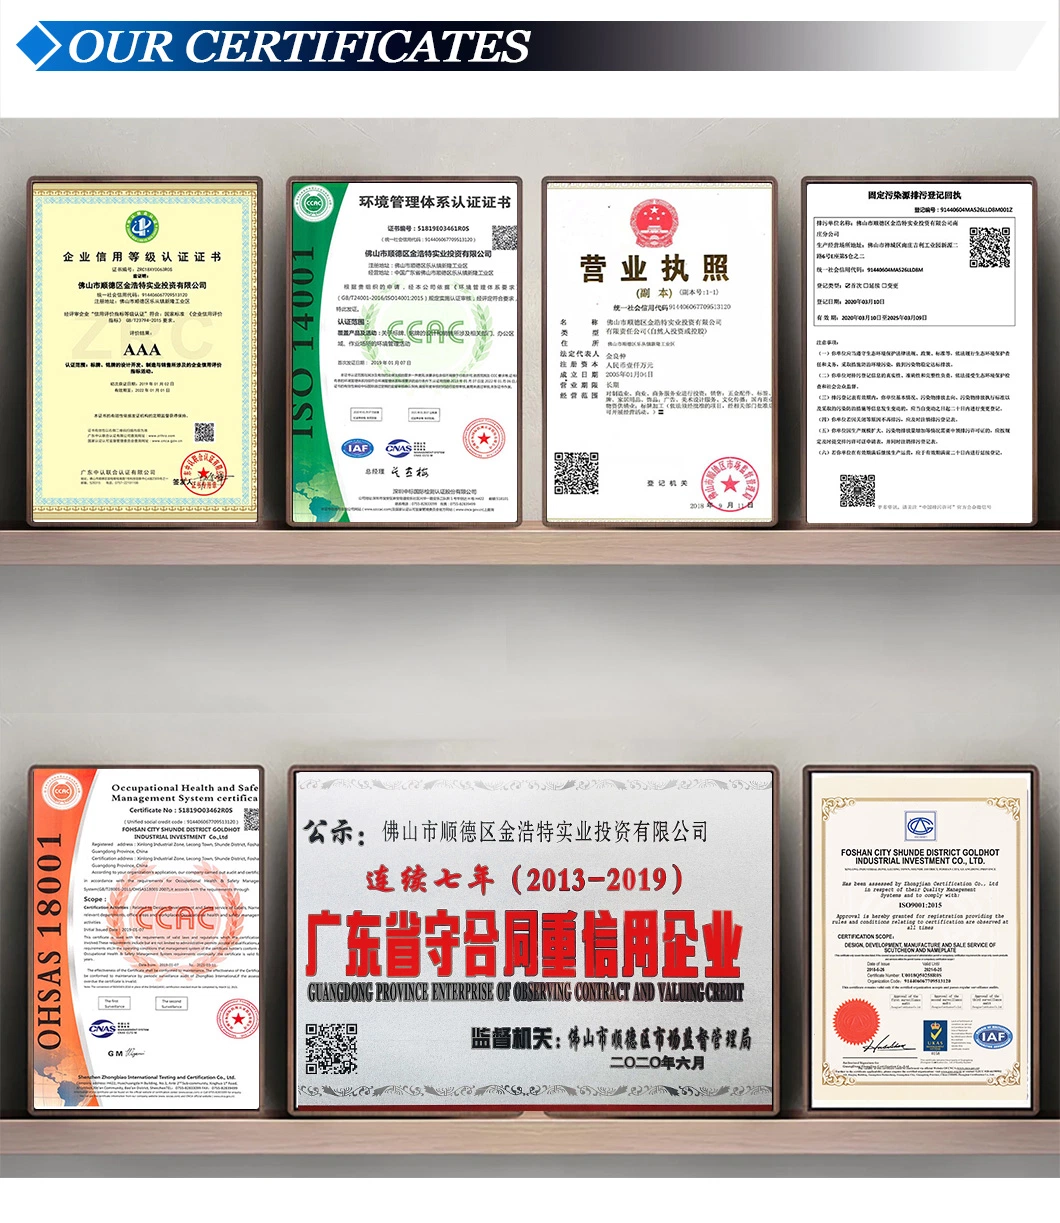 Acrylic PVC Metal Franchise Membership Authorized Certificate Plate Award Prize Medal Advertising Nameplate Plaque Coin Medallion